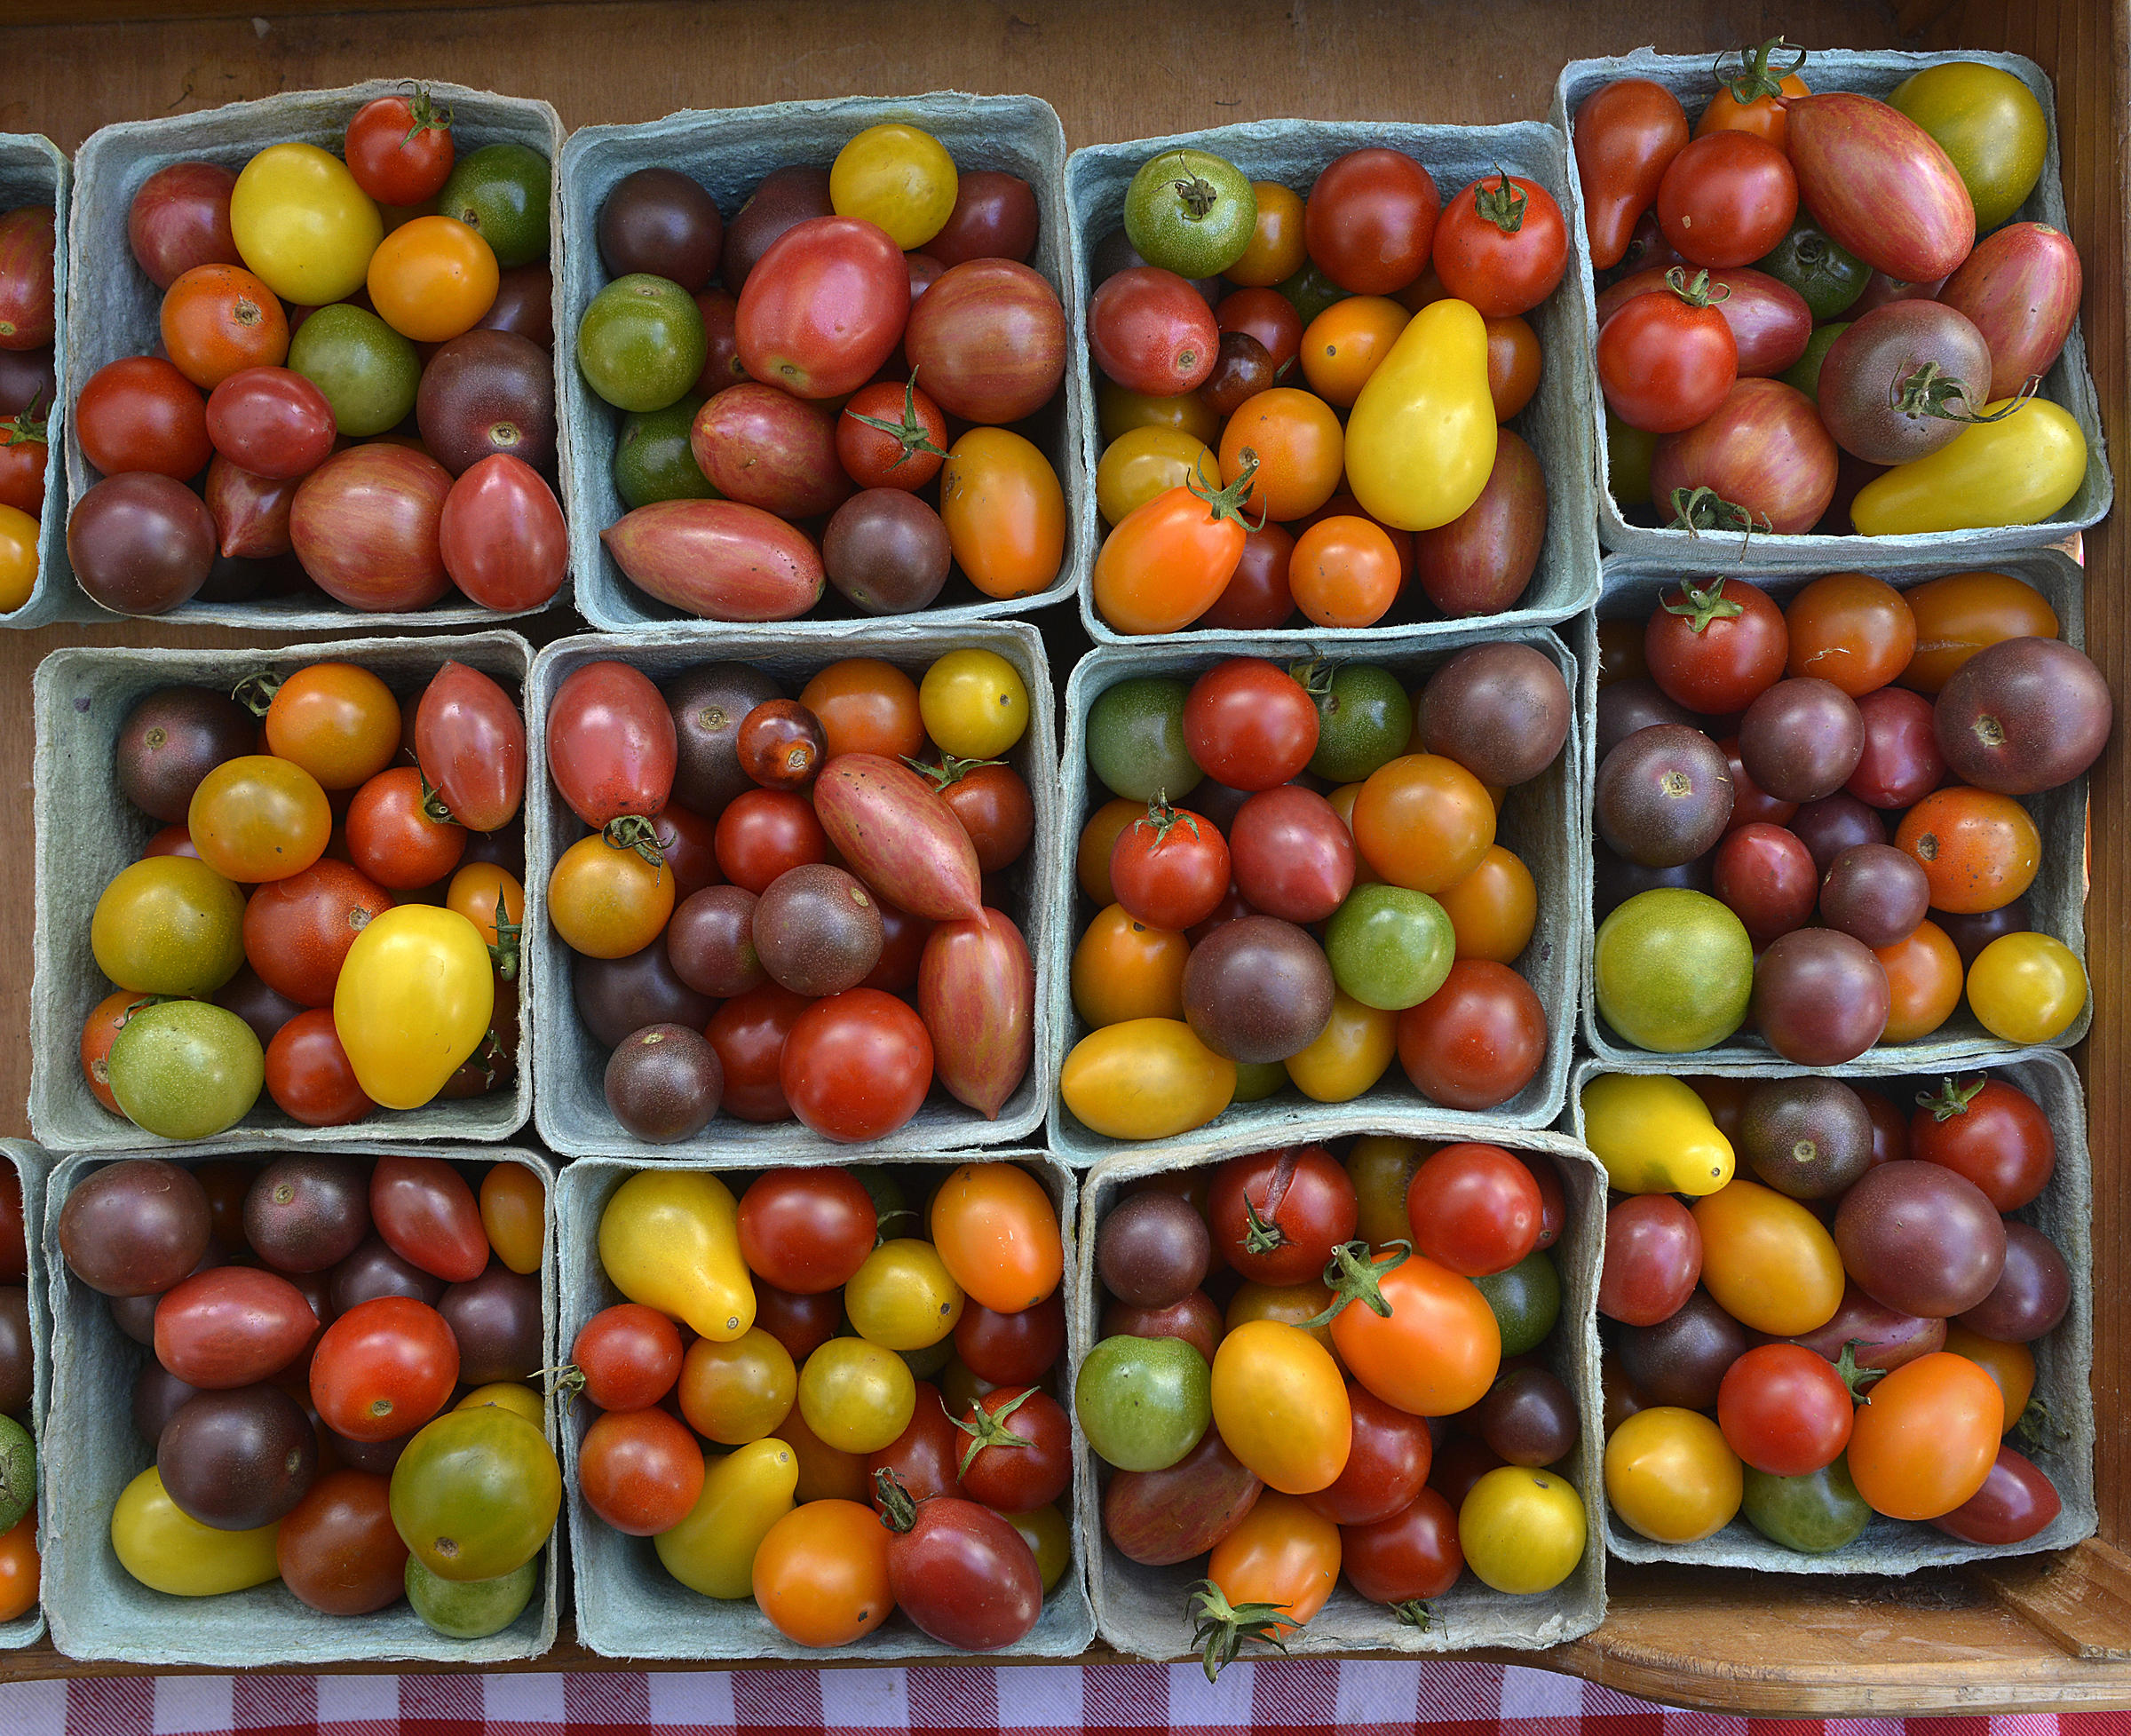 Heirloom cherry tomatoes at the Market Square farmers market, August 28, 2014. (Larry Roberts/Post-Gazette)